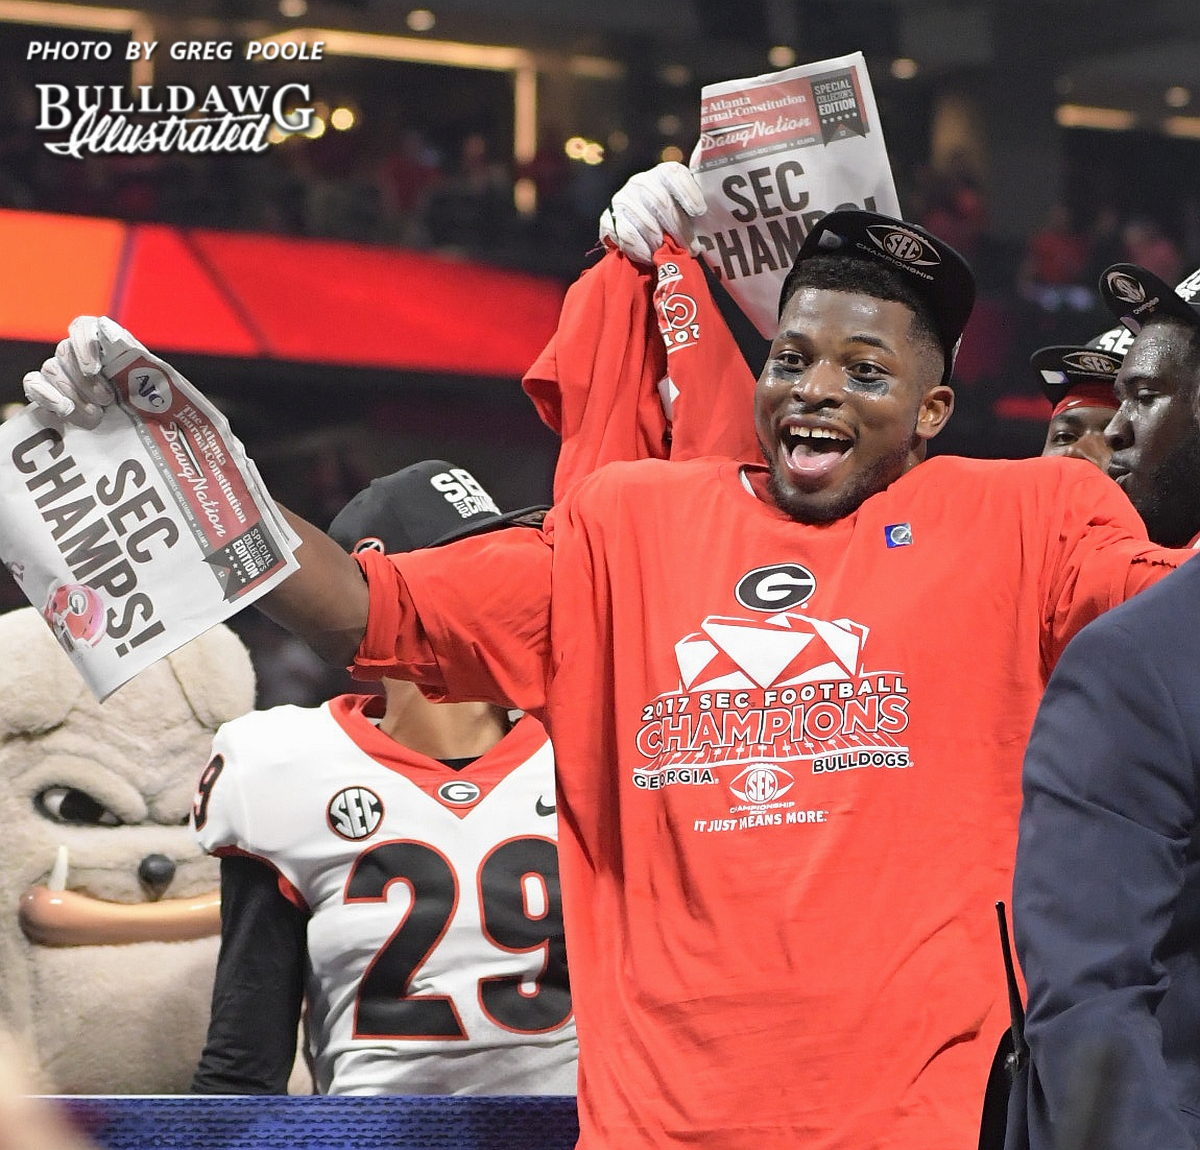 The Georgia football celebrates it's 28-7 victory over rival Auburn in the 2017 SEC Championship to earn the conference crown and title.